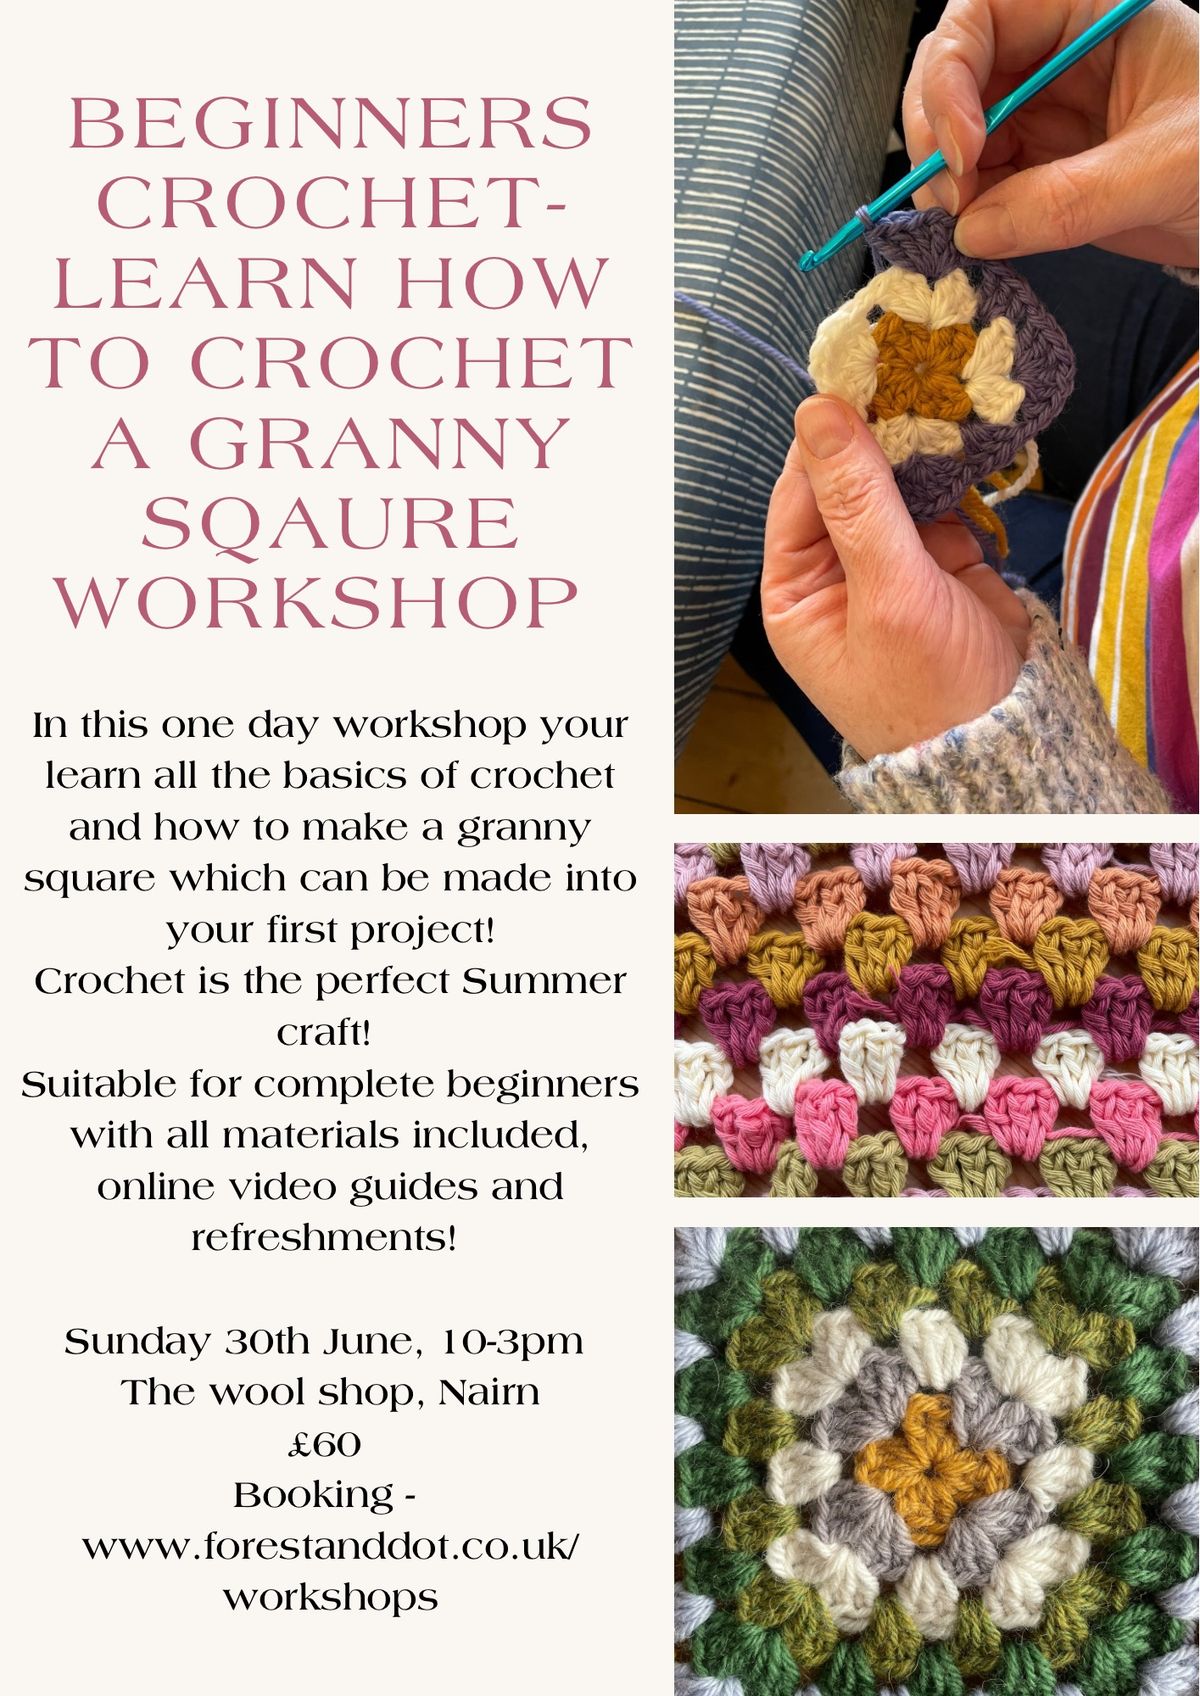 Beginners Learn how to Crochet a granny square workshop at Nairn Wool Shop, Nairn